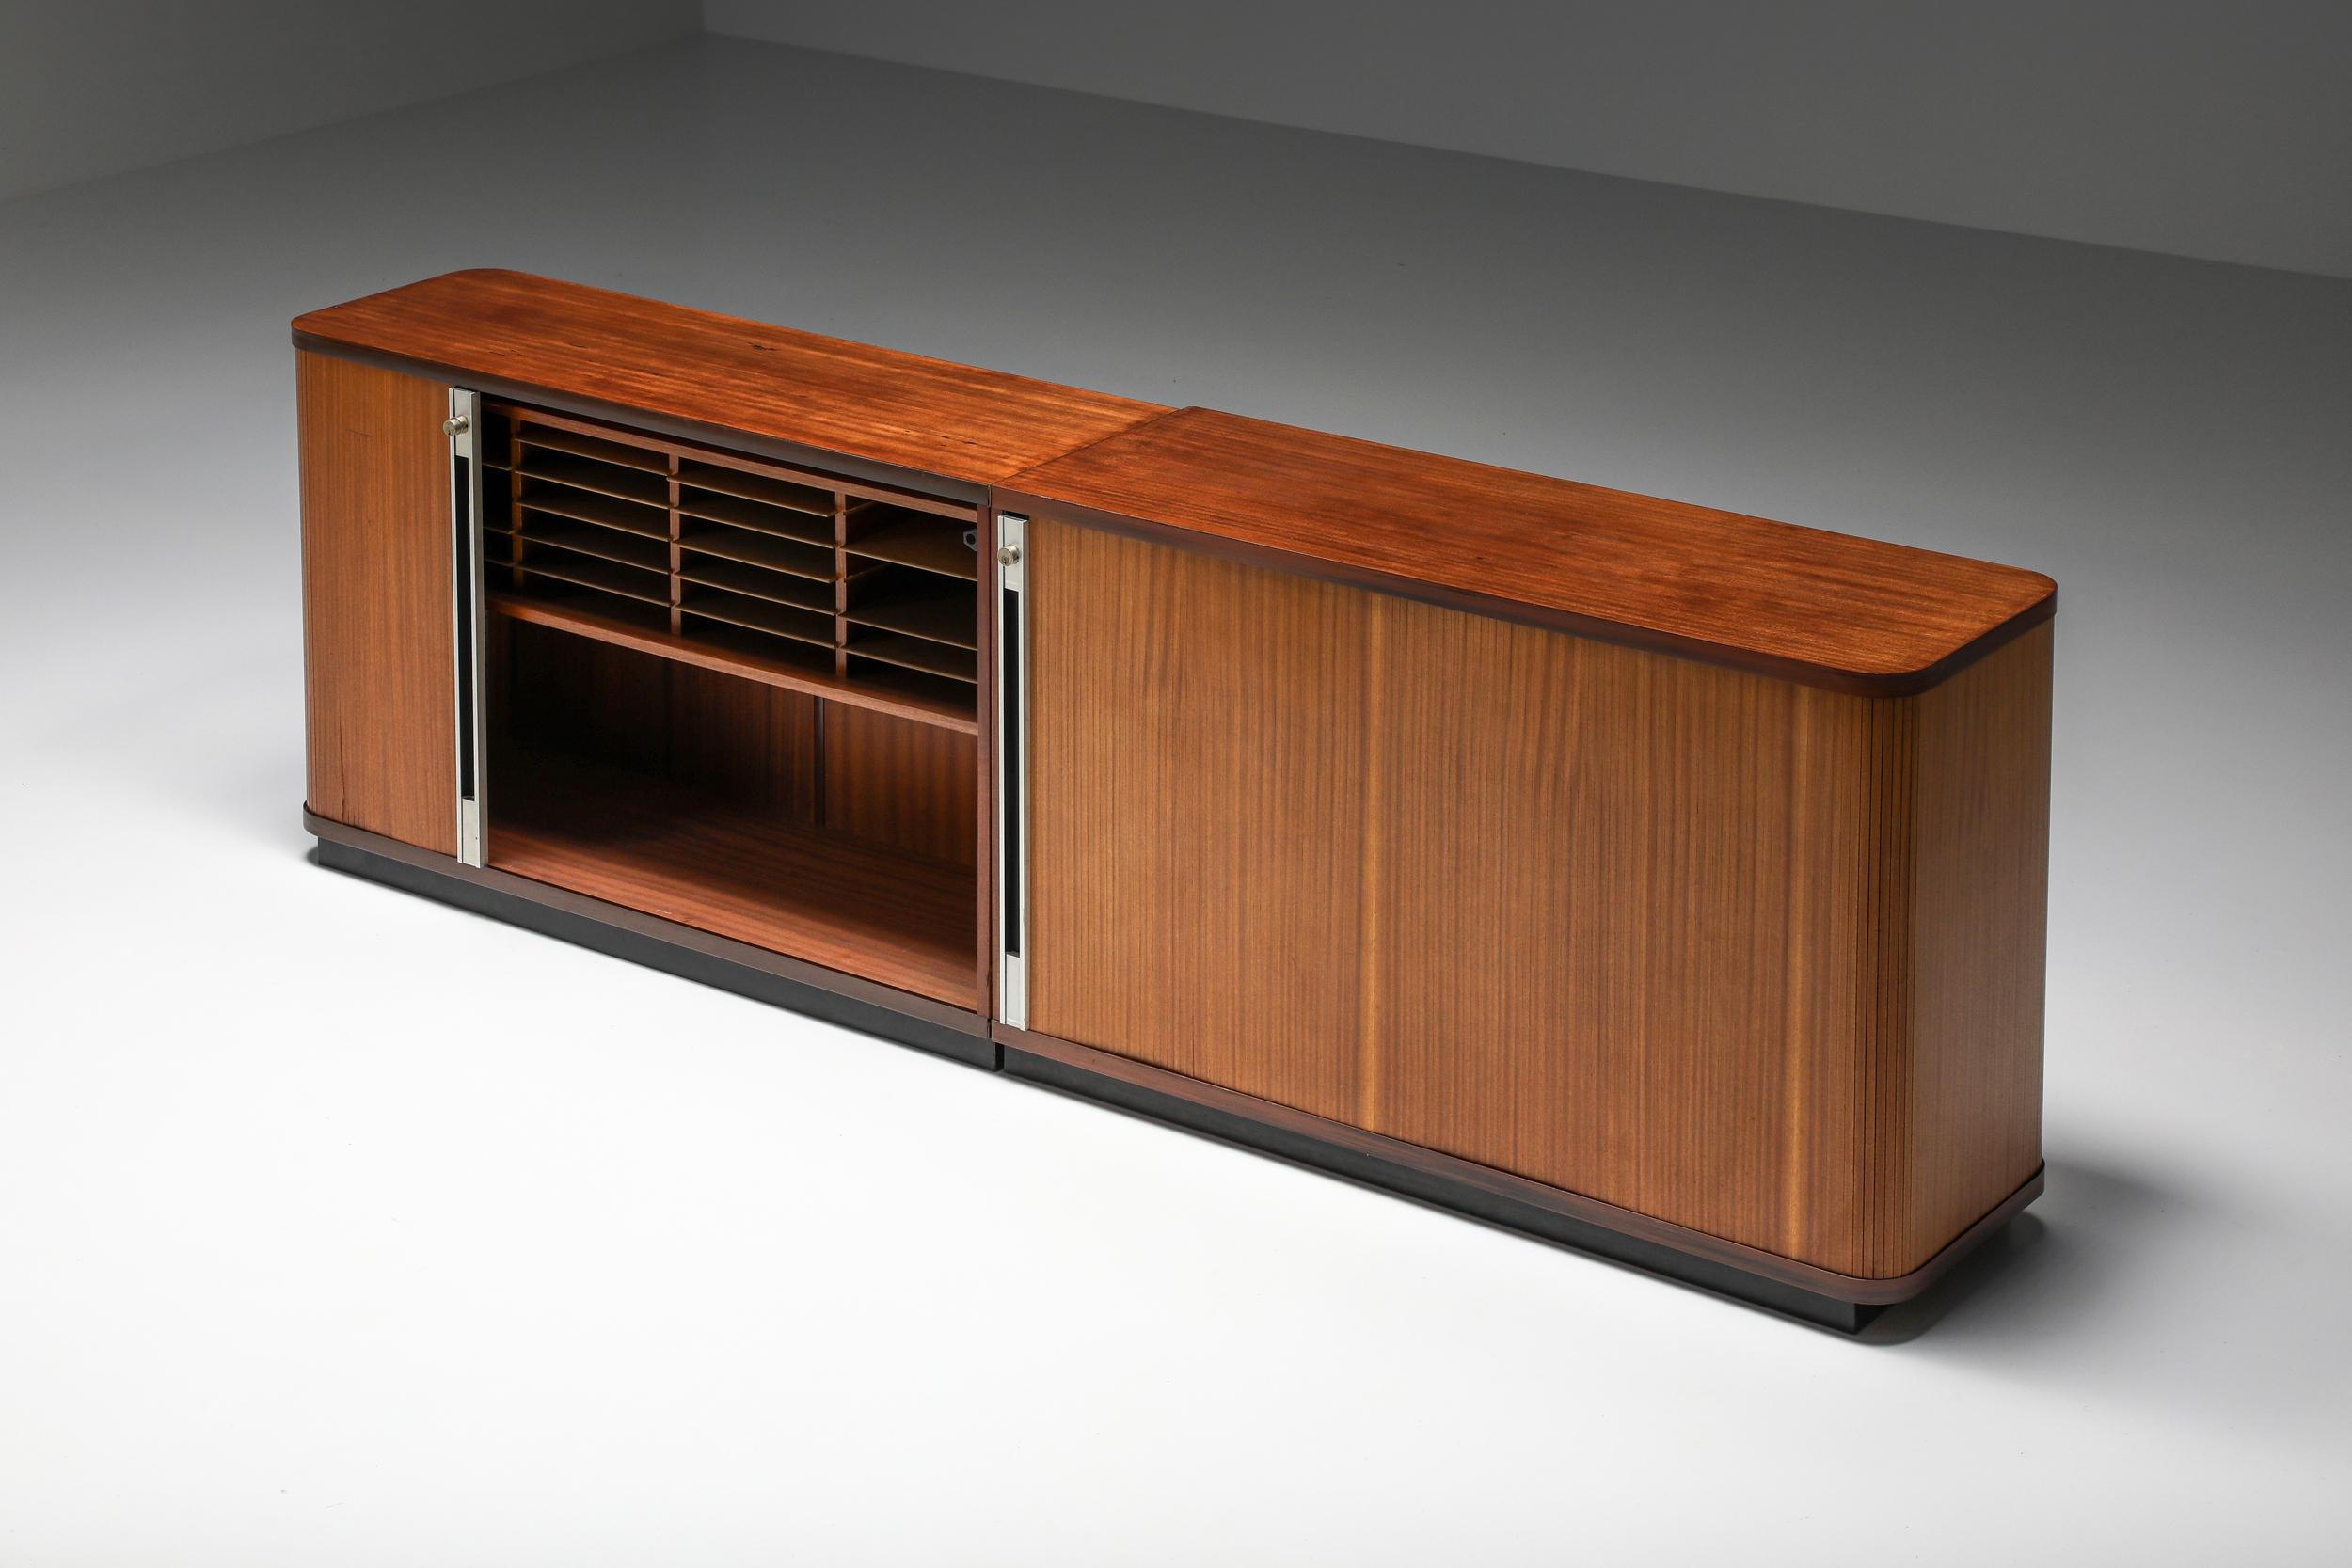 Knoll; Cabinet; Credenza; Sideboard: Teak; Roomdivider; Storage unit; Italian Design;

Florence Knoll style set of two teak office sideboards with tambour doors. Can be used as room dividers since the back is also finished in teak. The cabinets